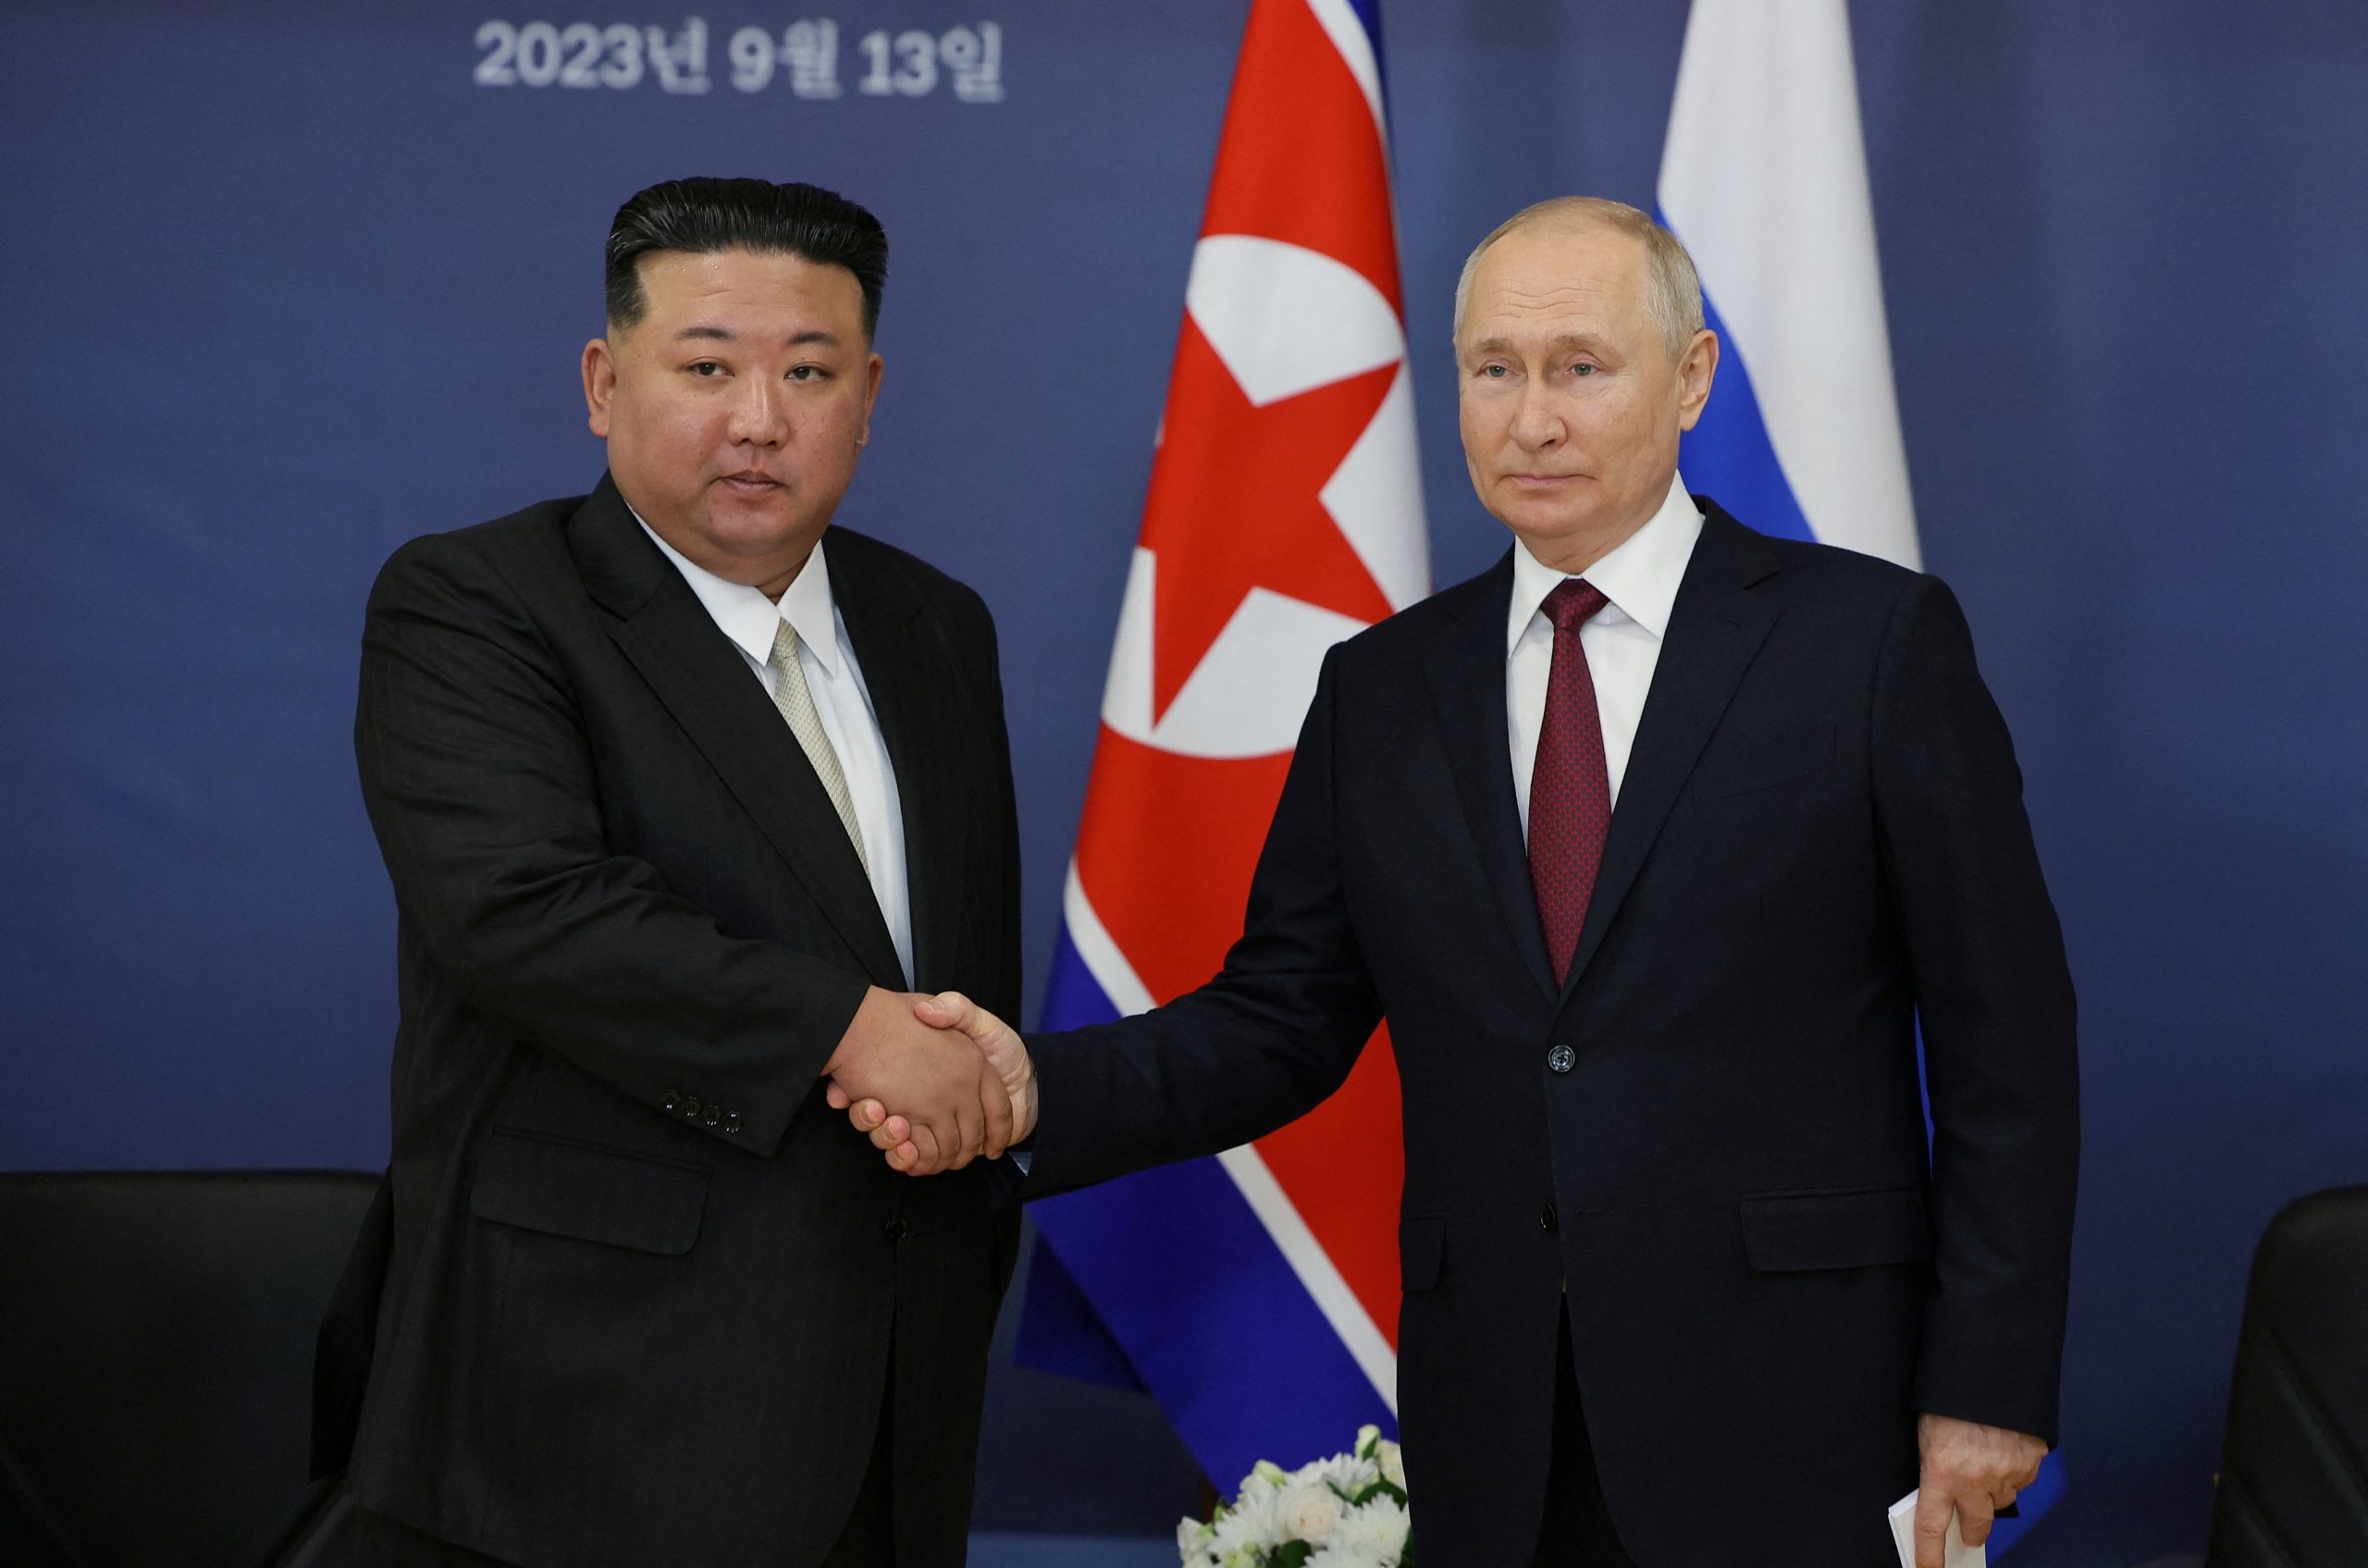 In his opening remarks, Putin welcomed Kim to Russia and said he was glad to see him, saying the talks would cover economic cooperation, humanitarian issues and the 'situation in the region'. [Sputnik/Vladimir Smirnov/Reuters]